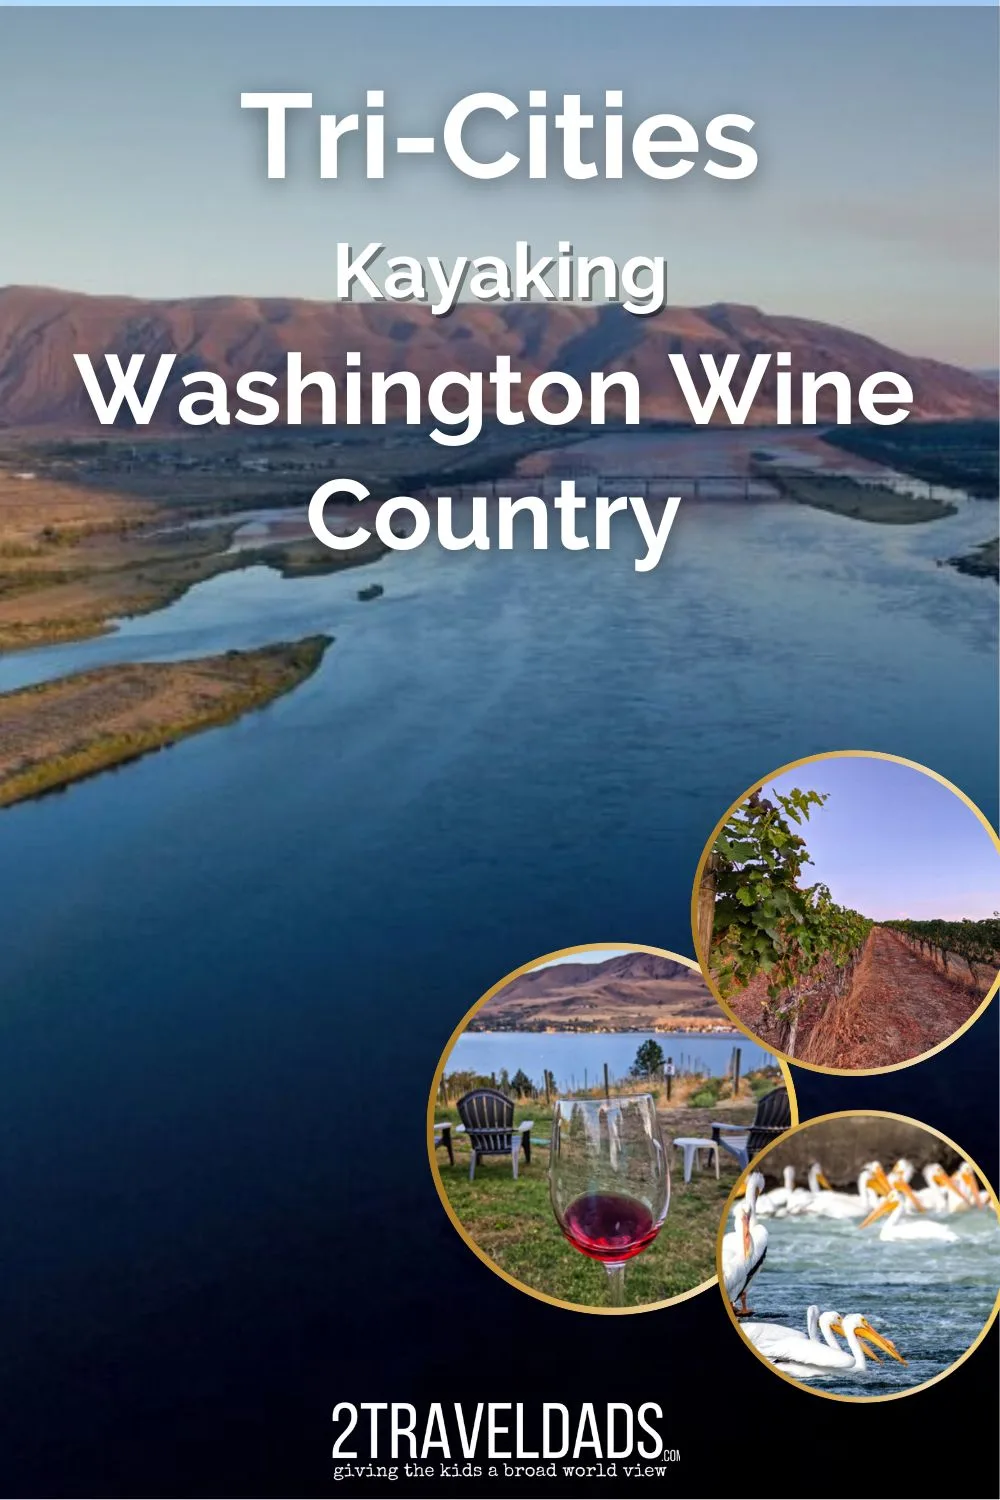 Kayaking in the Tri Cities of Washington's wine country is a mix of epic cliffs and rolling farm country. Top spots to kayak on the Columbia and Snake Rivers in Kennewick, Pasco and Richland, Washington.